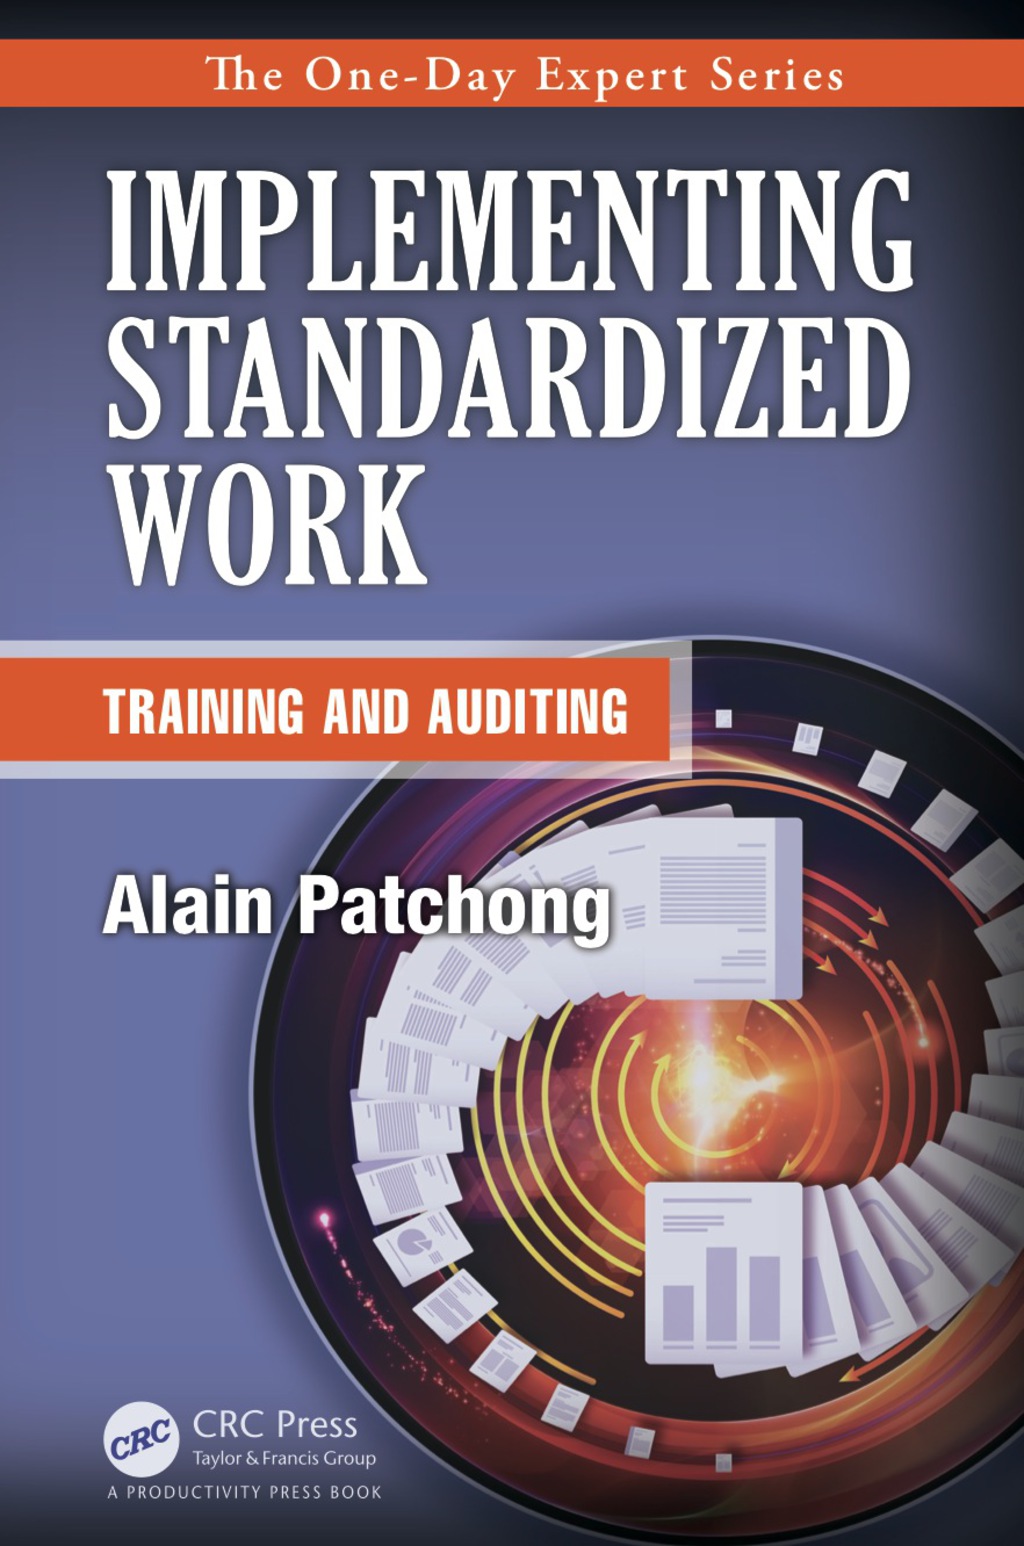 Implementing Standardized Work (eBook) - Alain Patchong